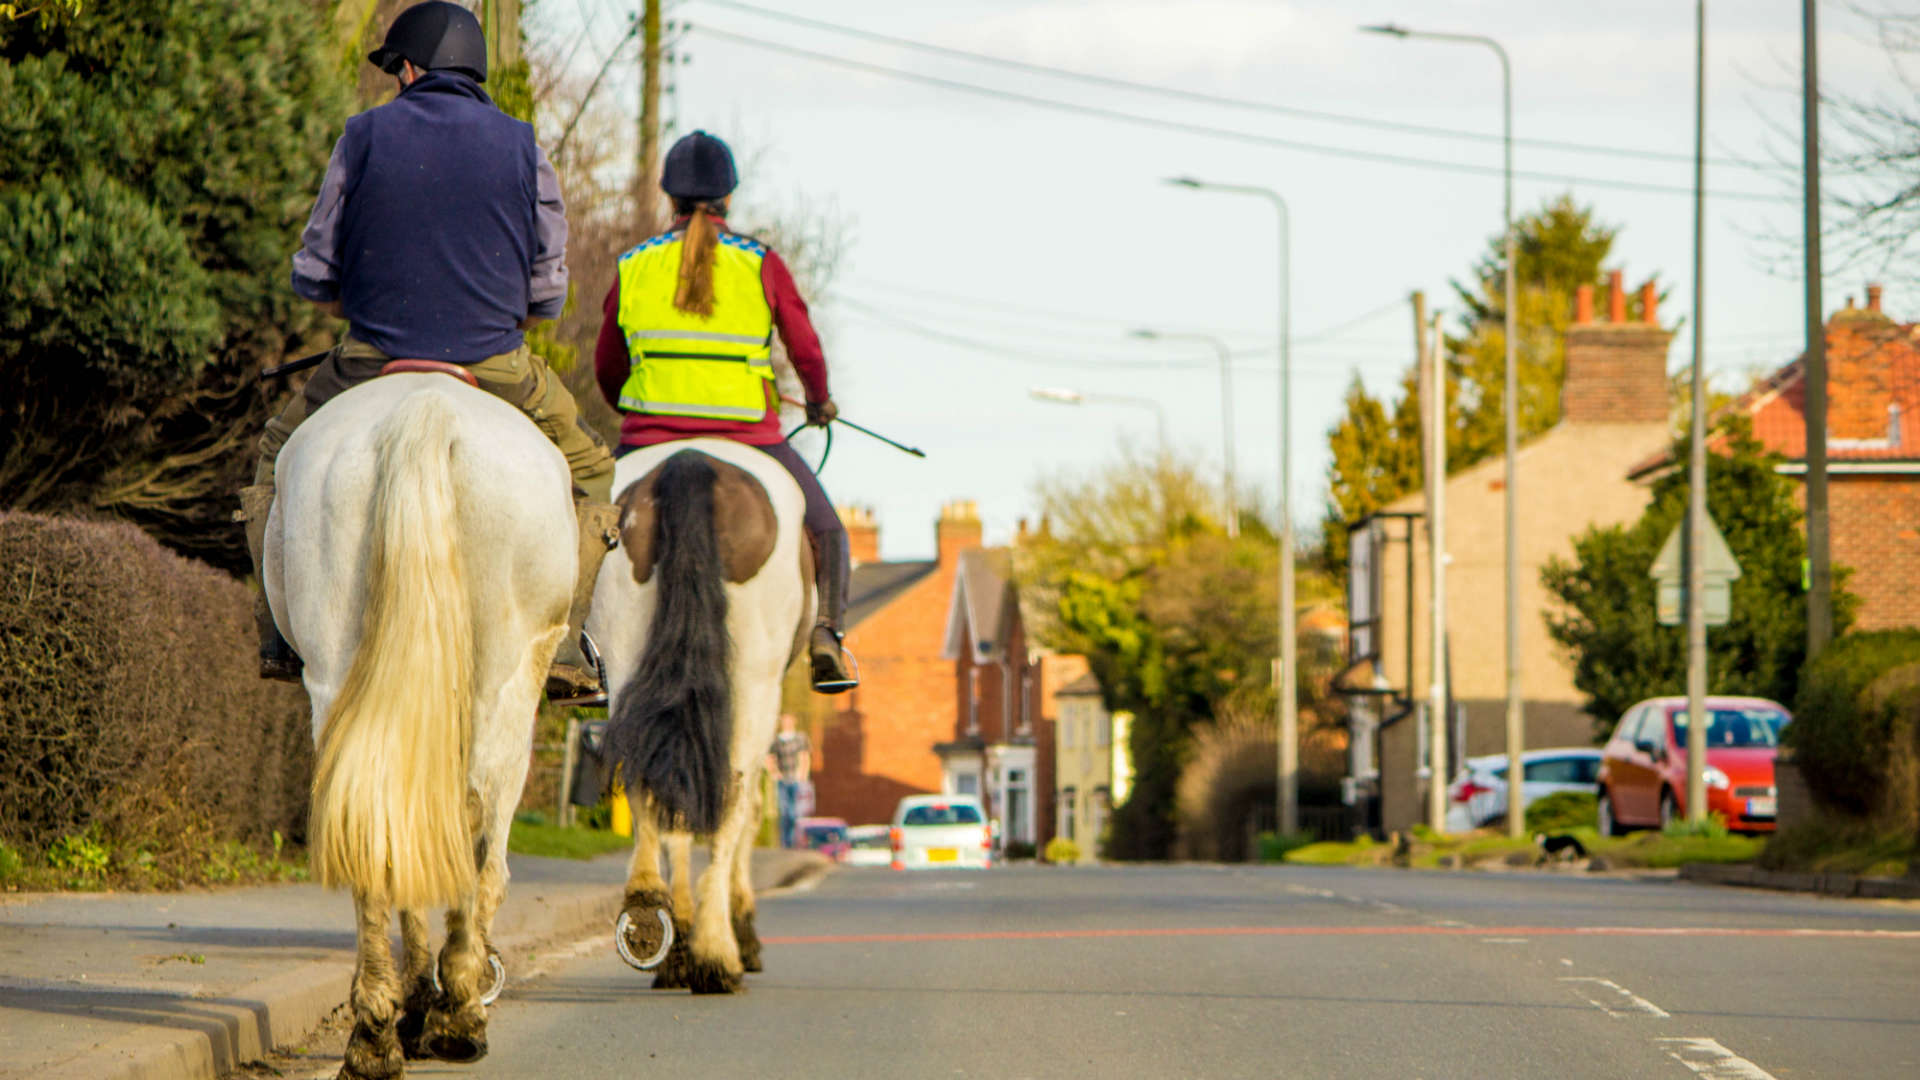 How to pass horses safely on the road